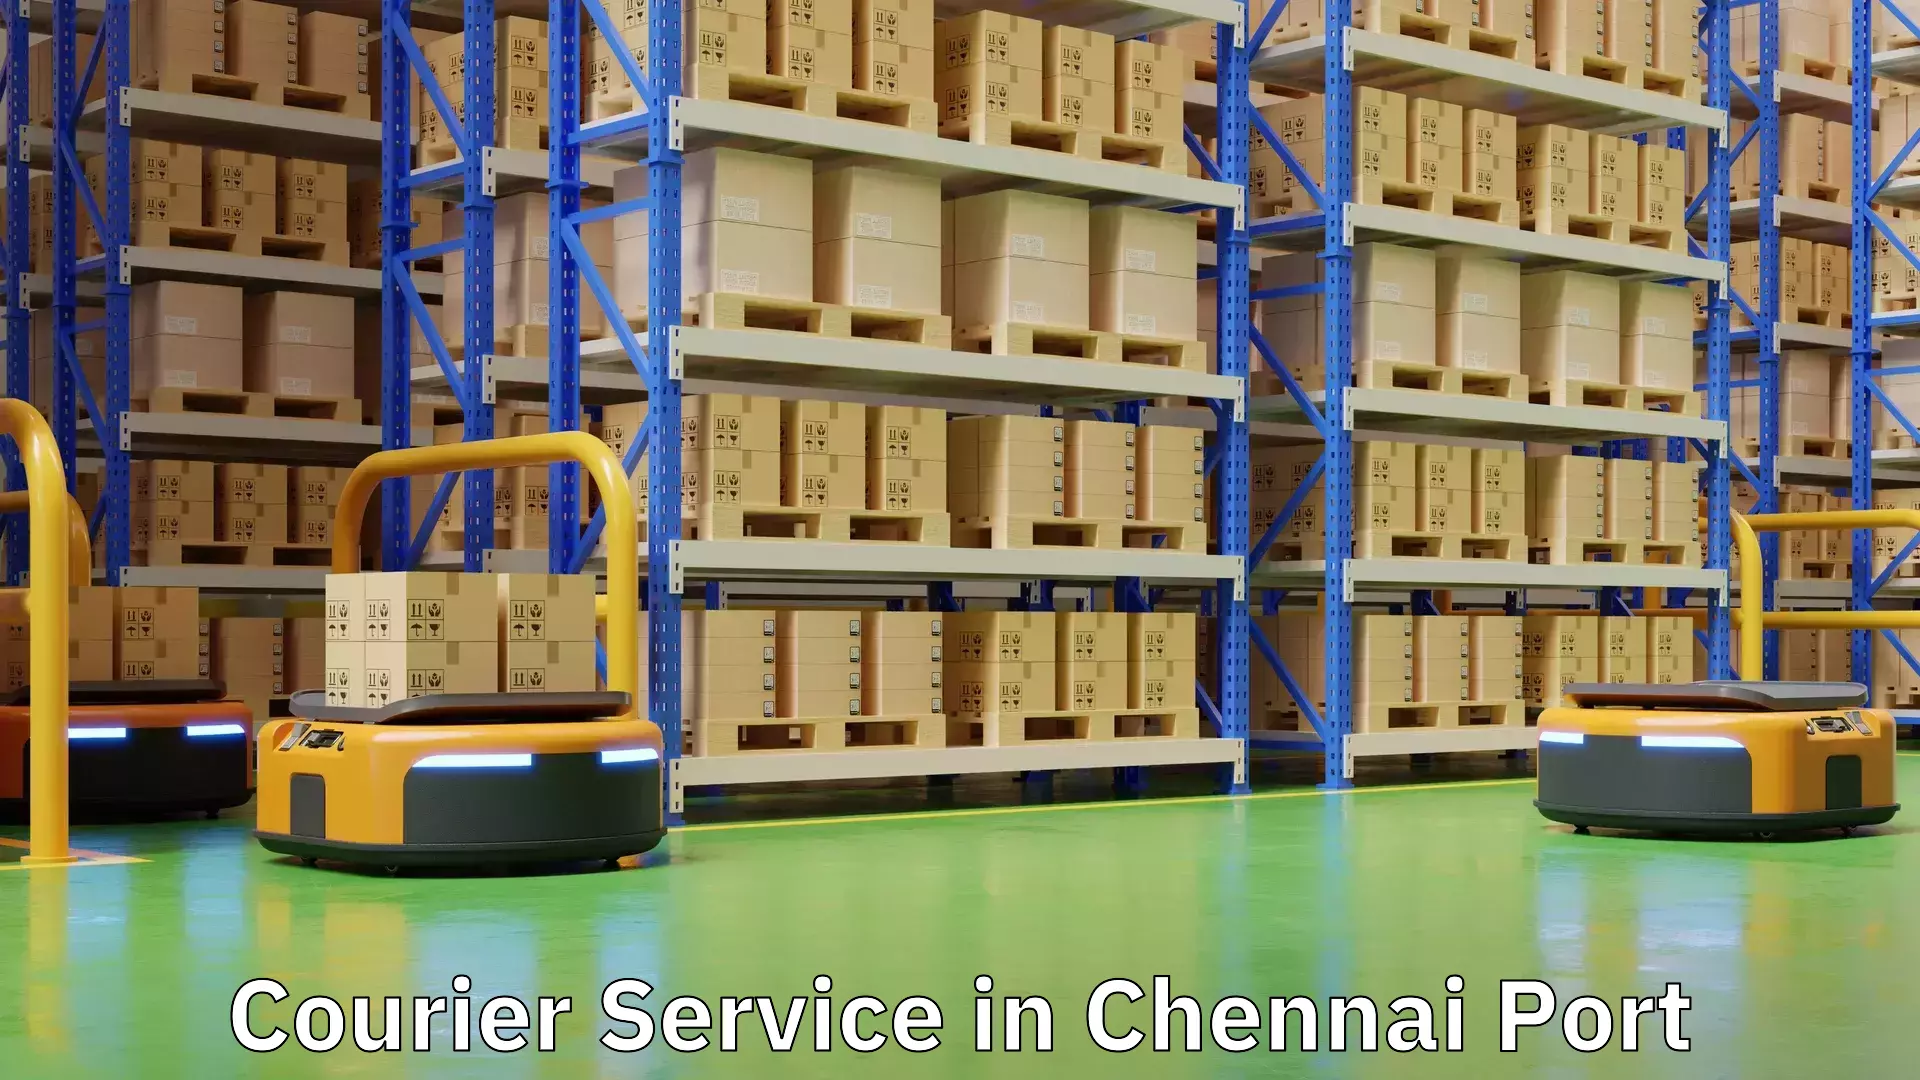 Domestic delivery options in Chennai Port